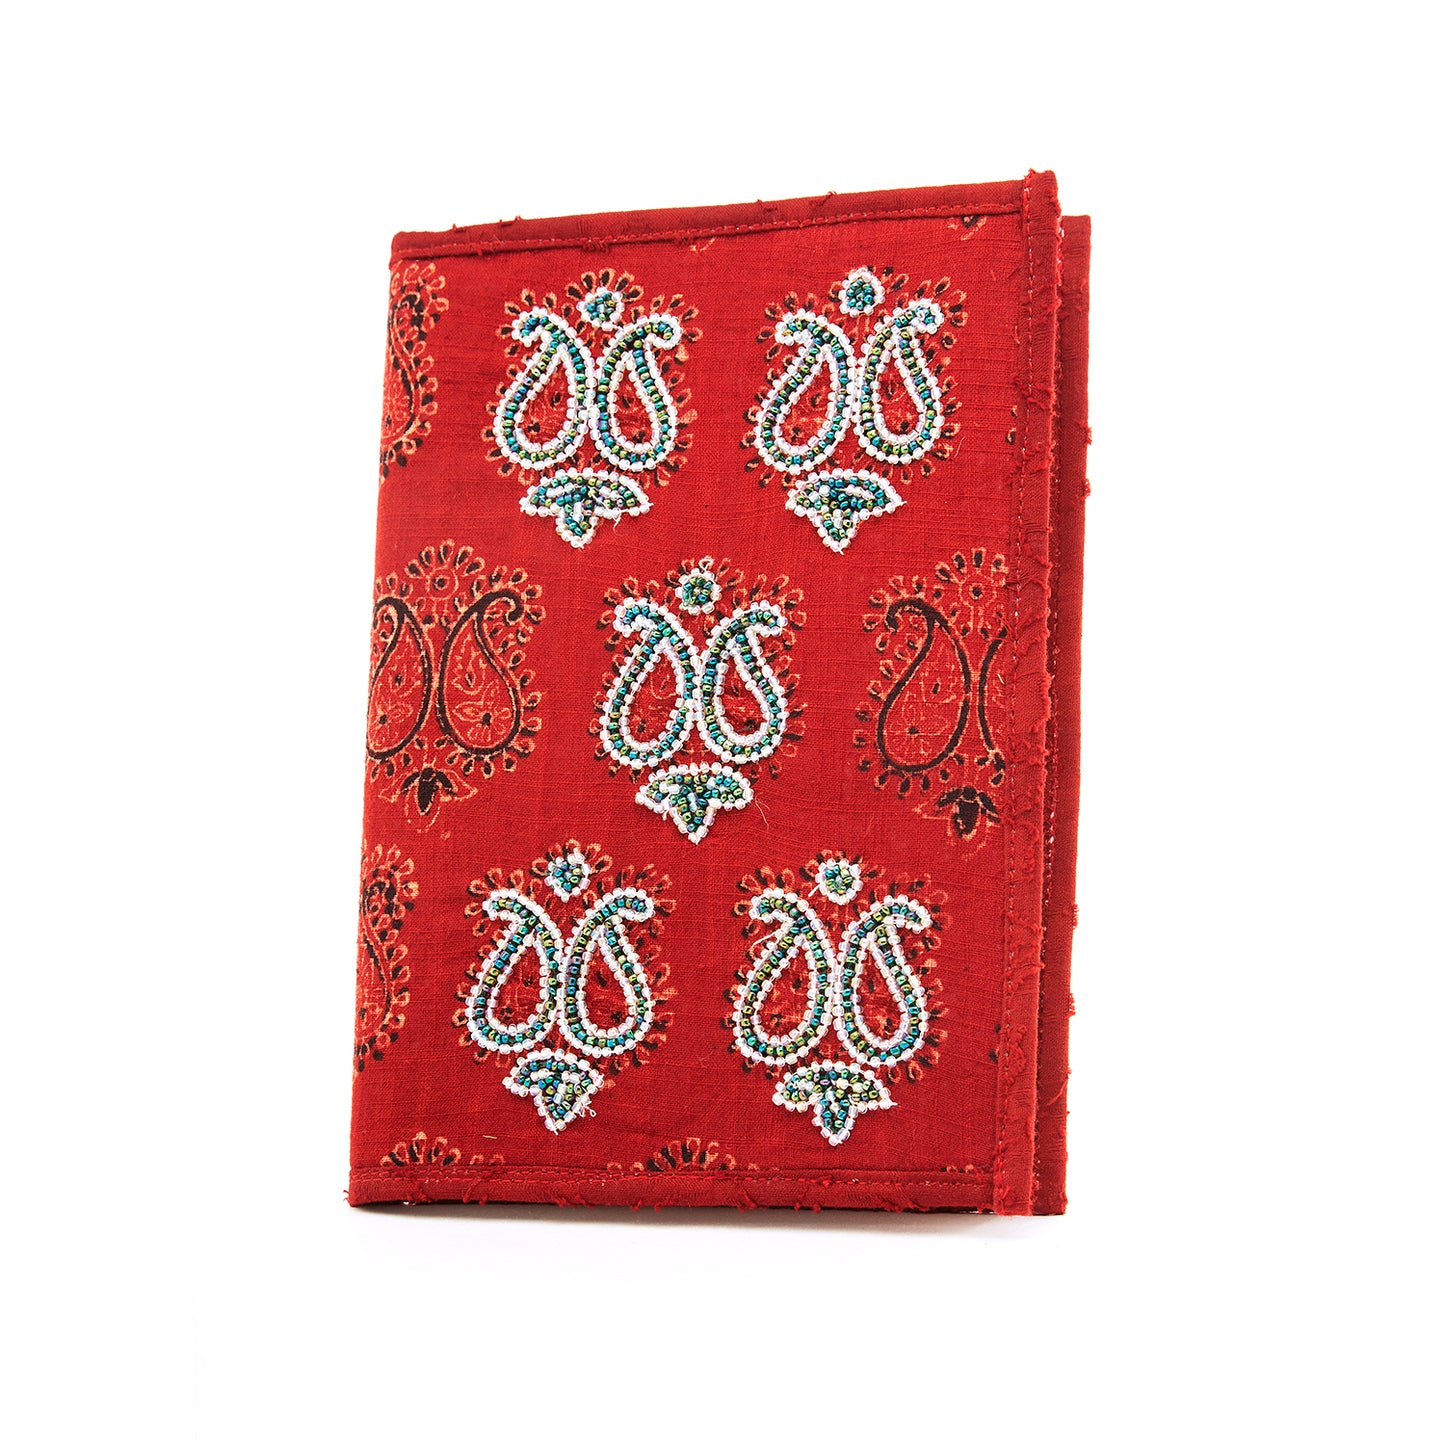 Cherry Red - Diary with reusable cover made of waste fabric (with Ari Work)